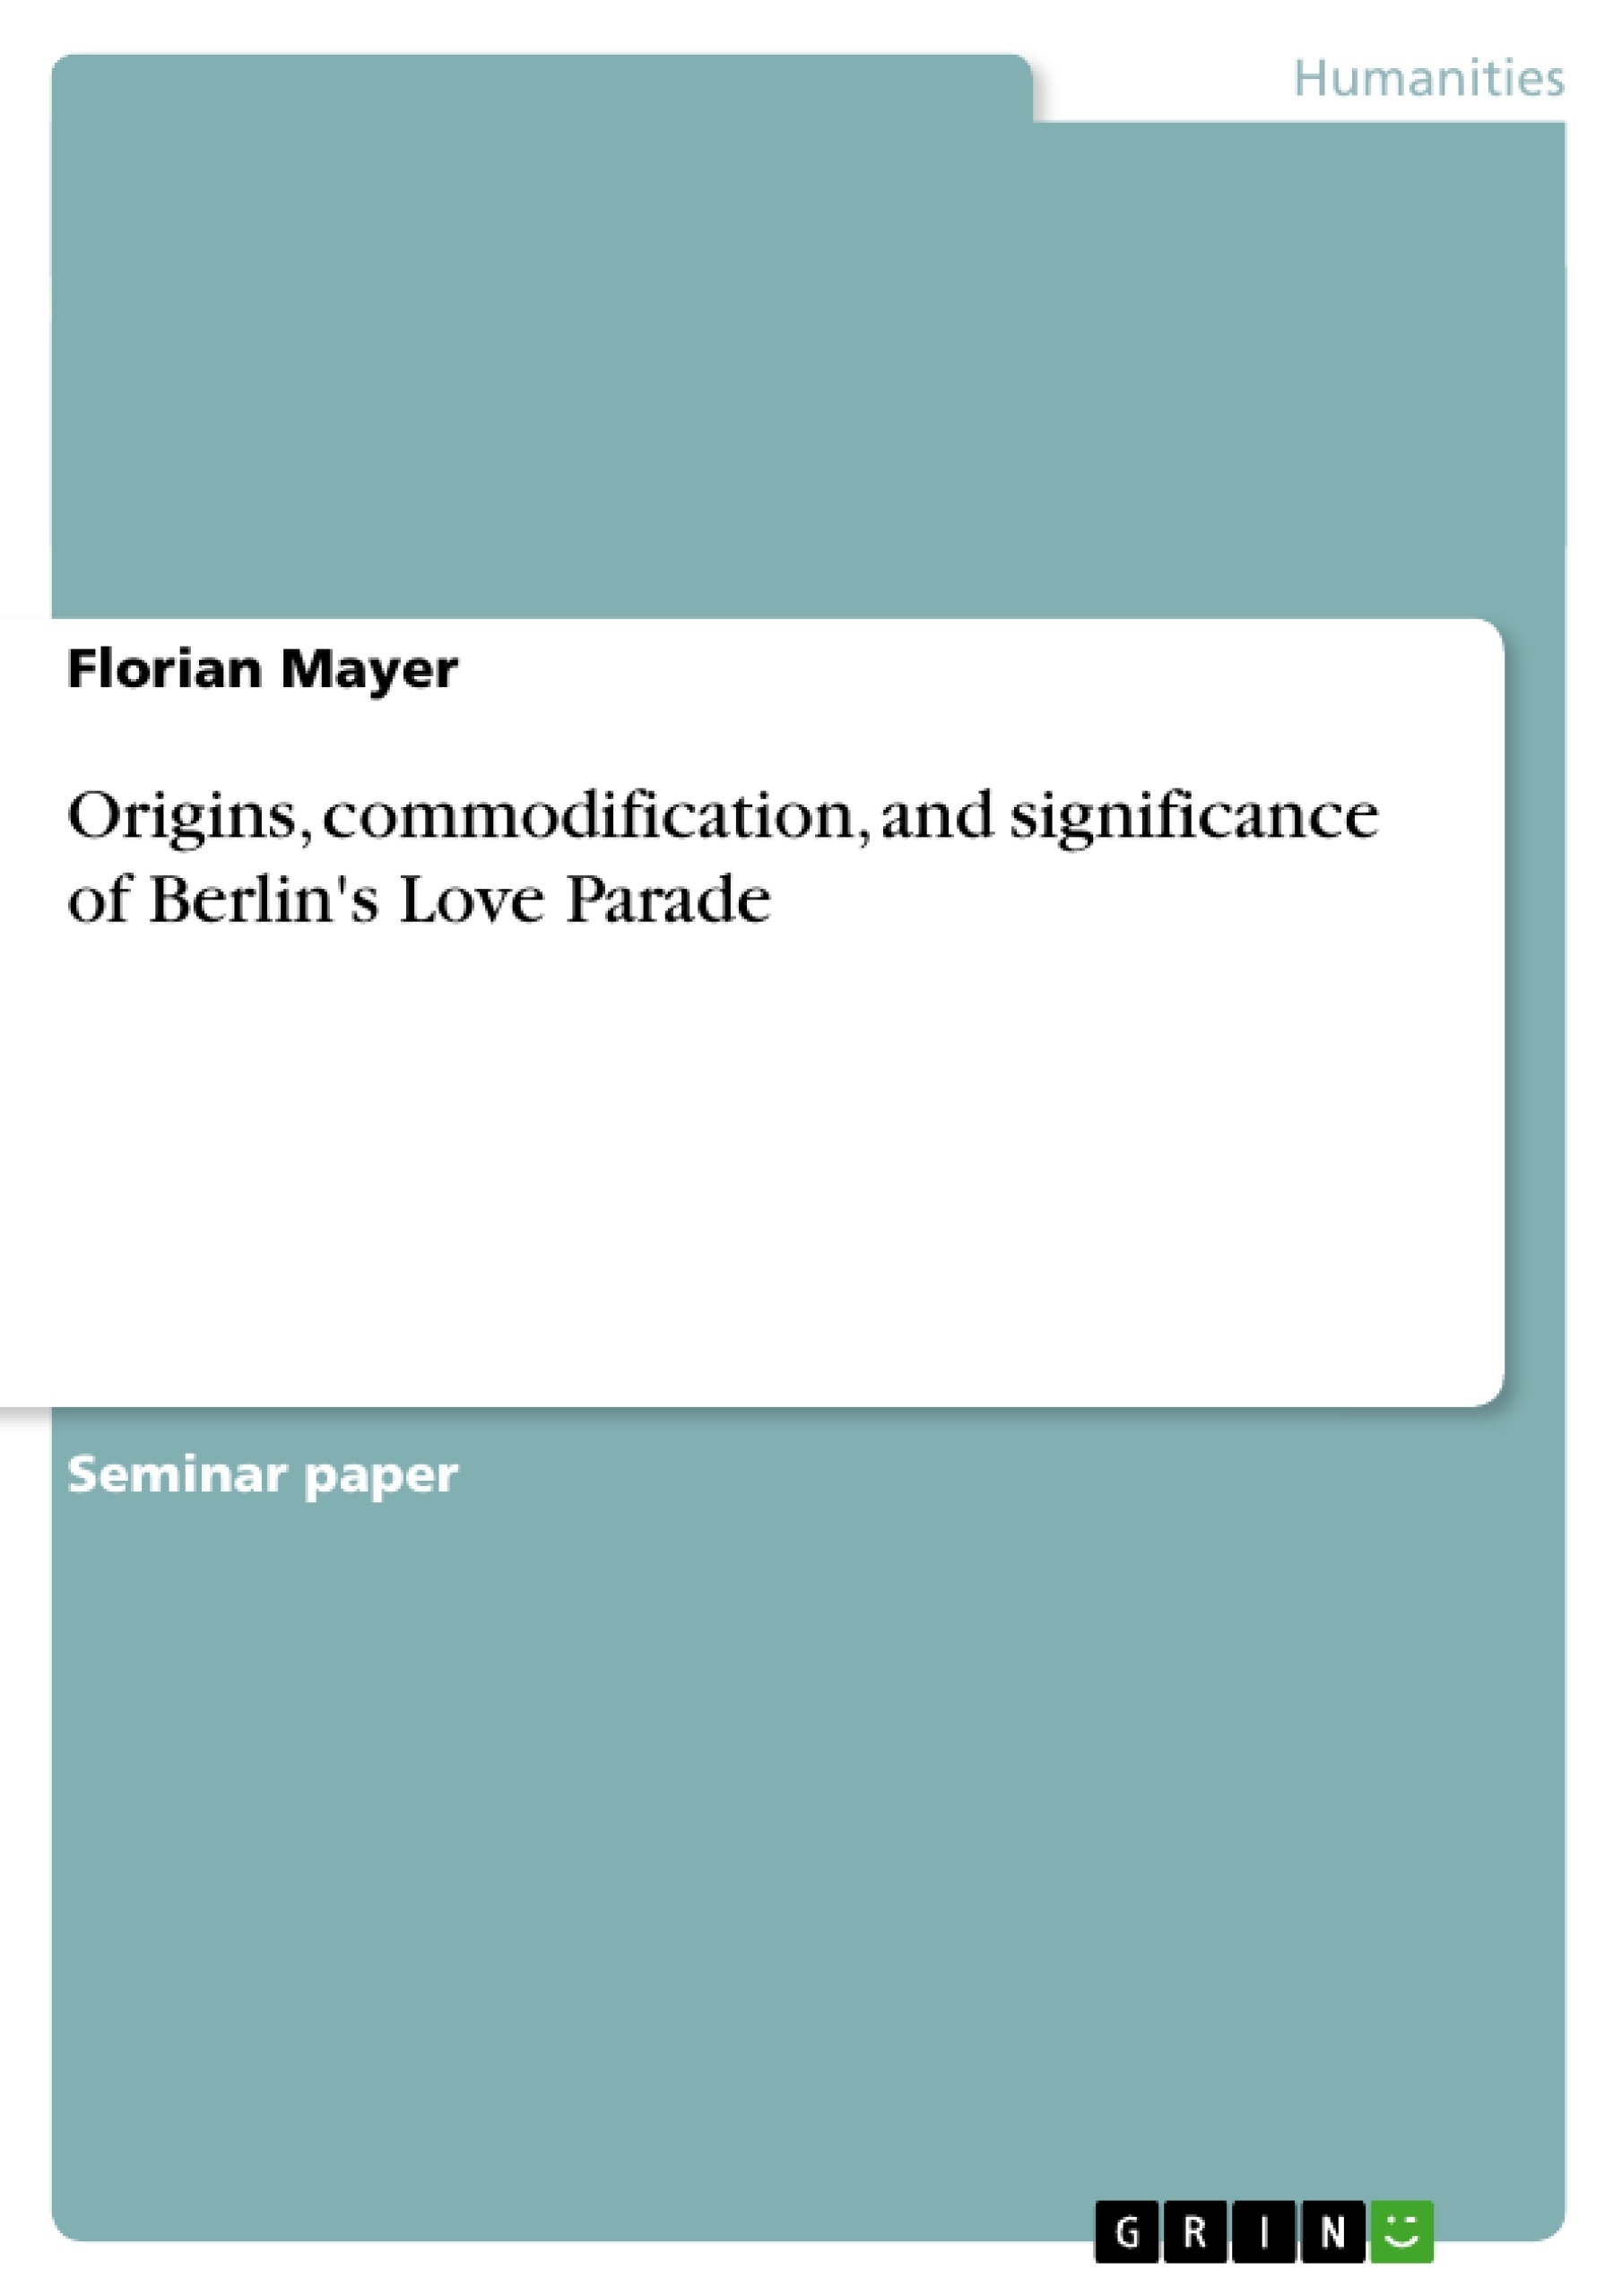 Título: Origins, commodification, and significance of Berlin's Love Parade